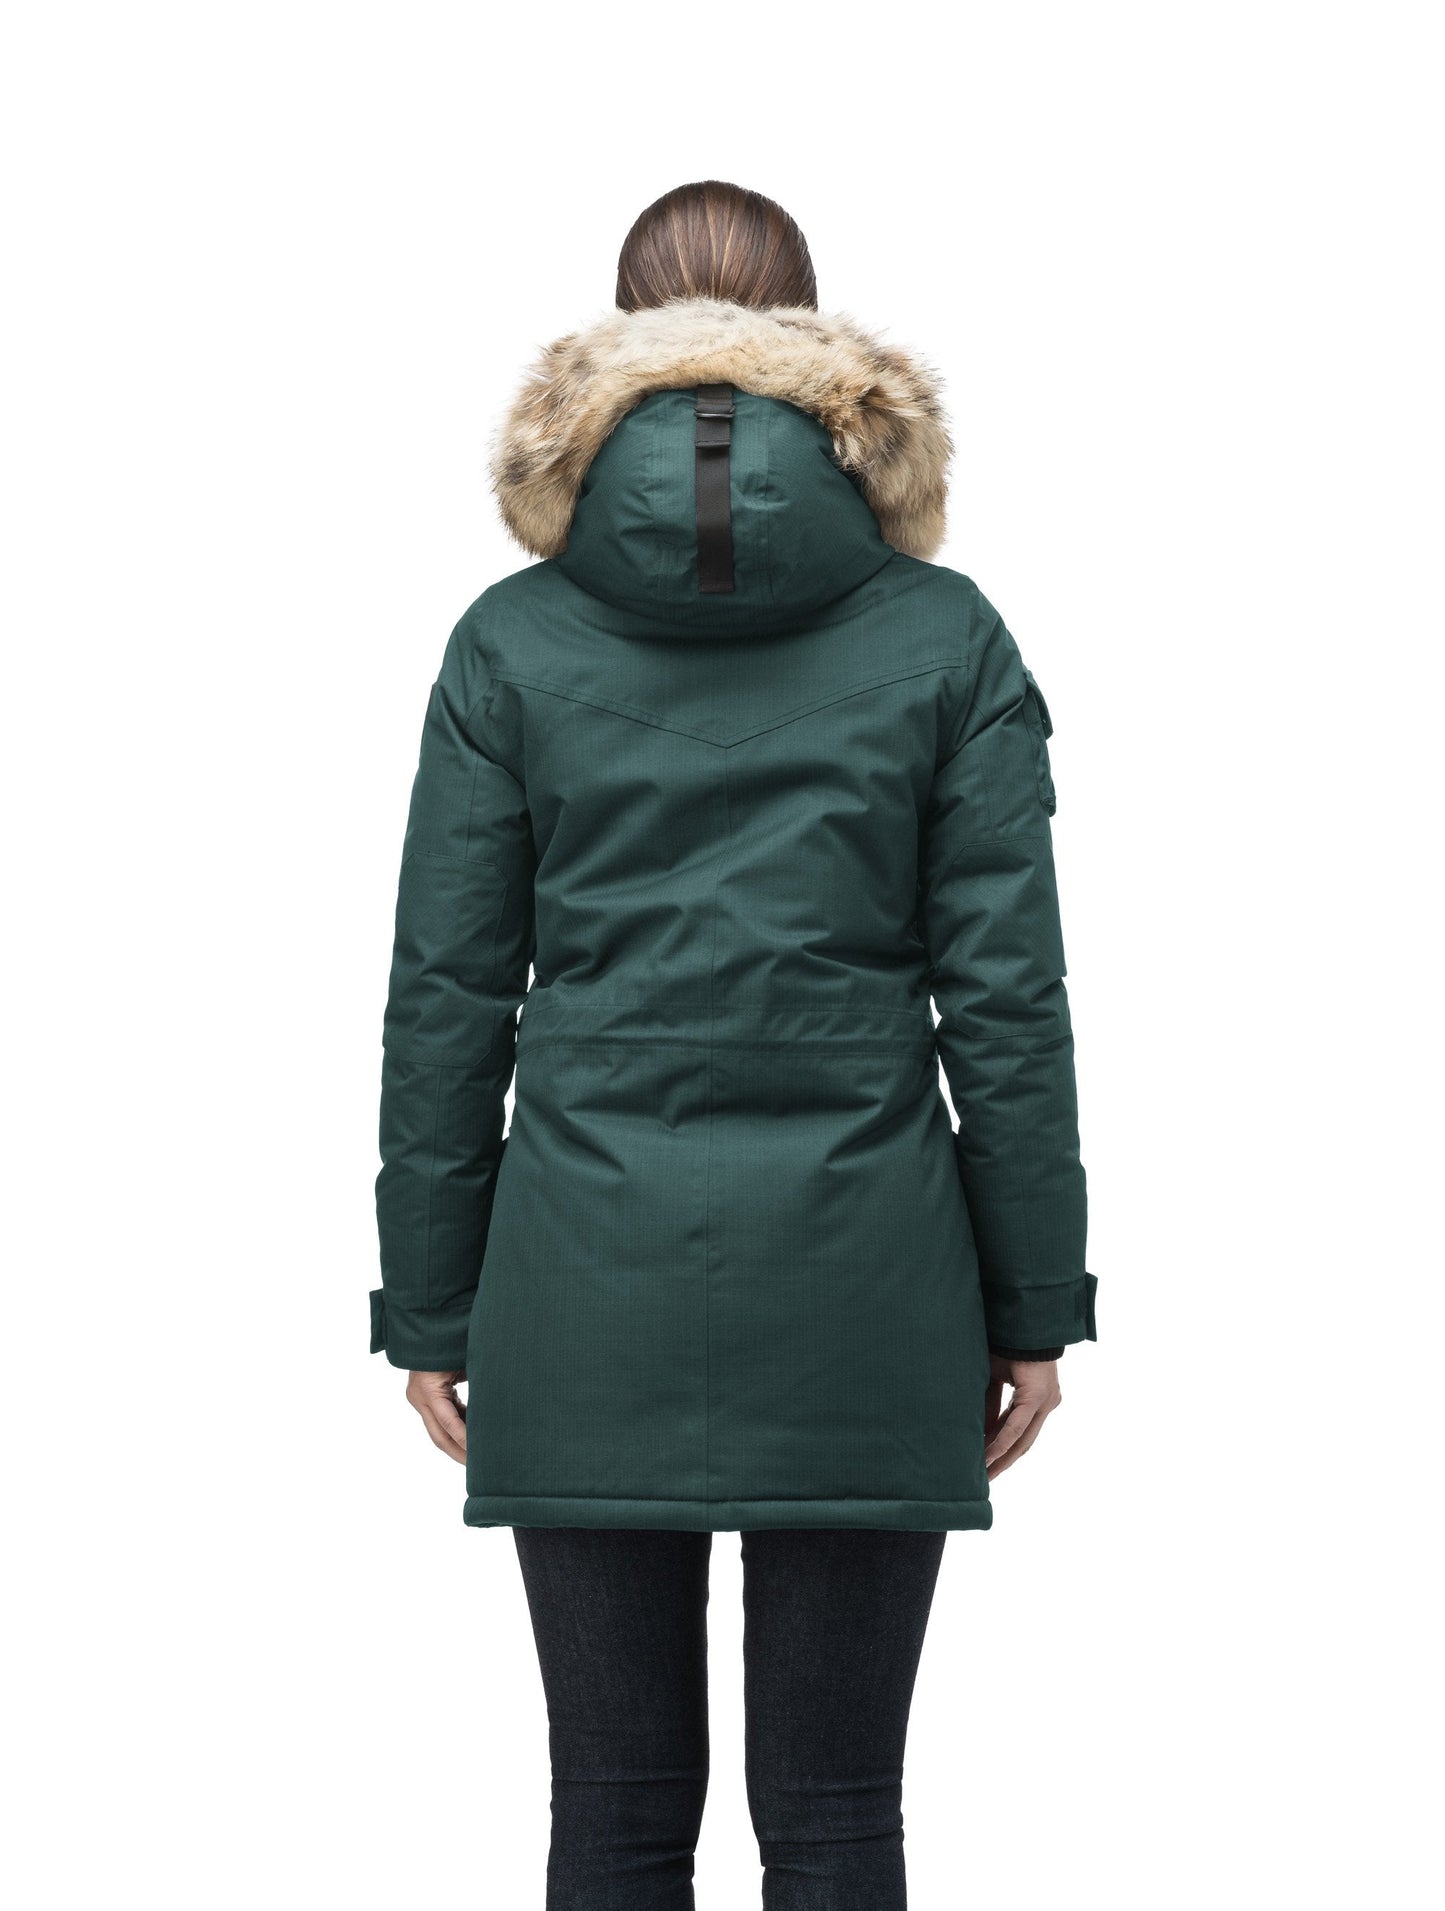 Women's down filled thigh length parka with four pleated patch pockets and an adjustable waist in CH Forest